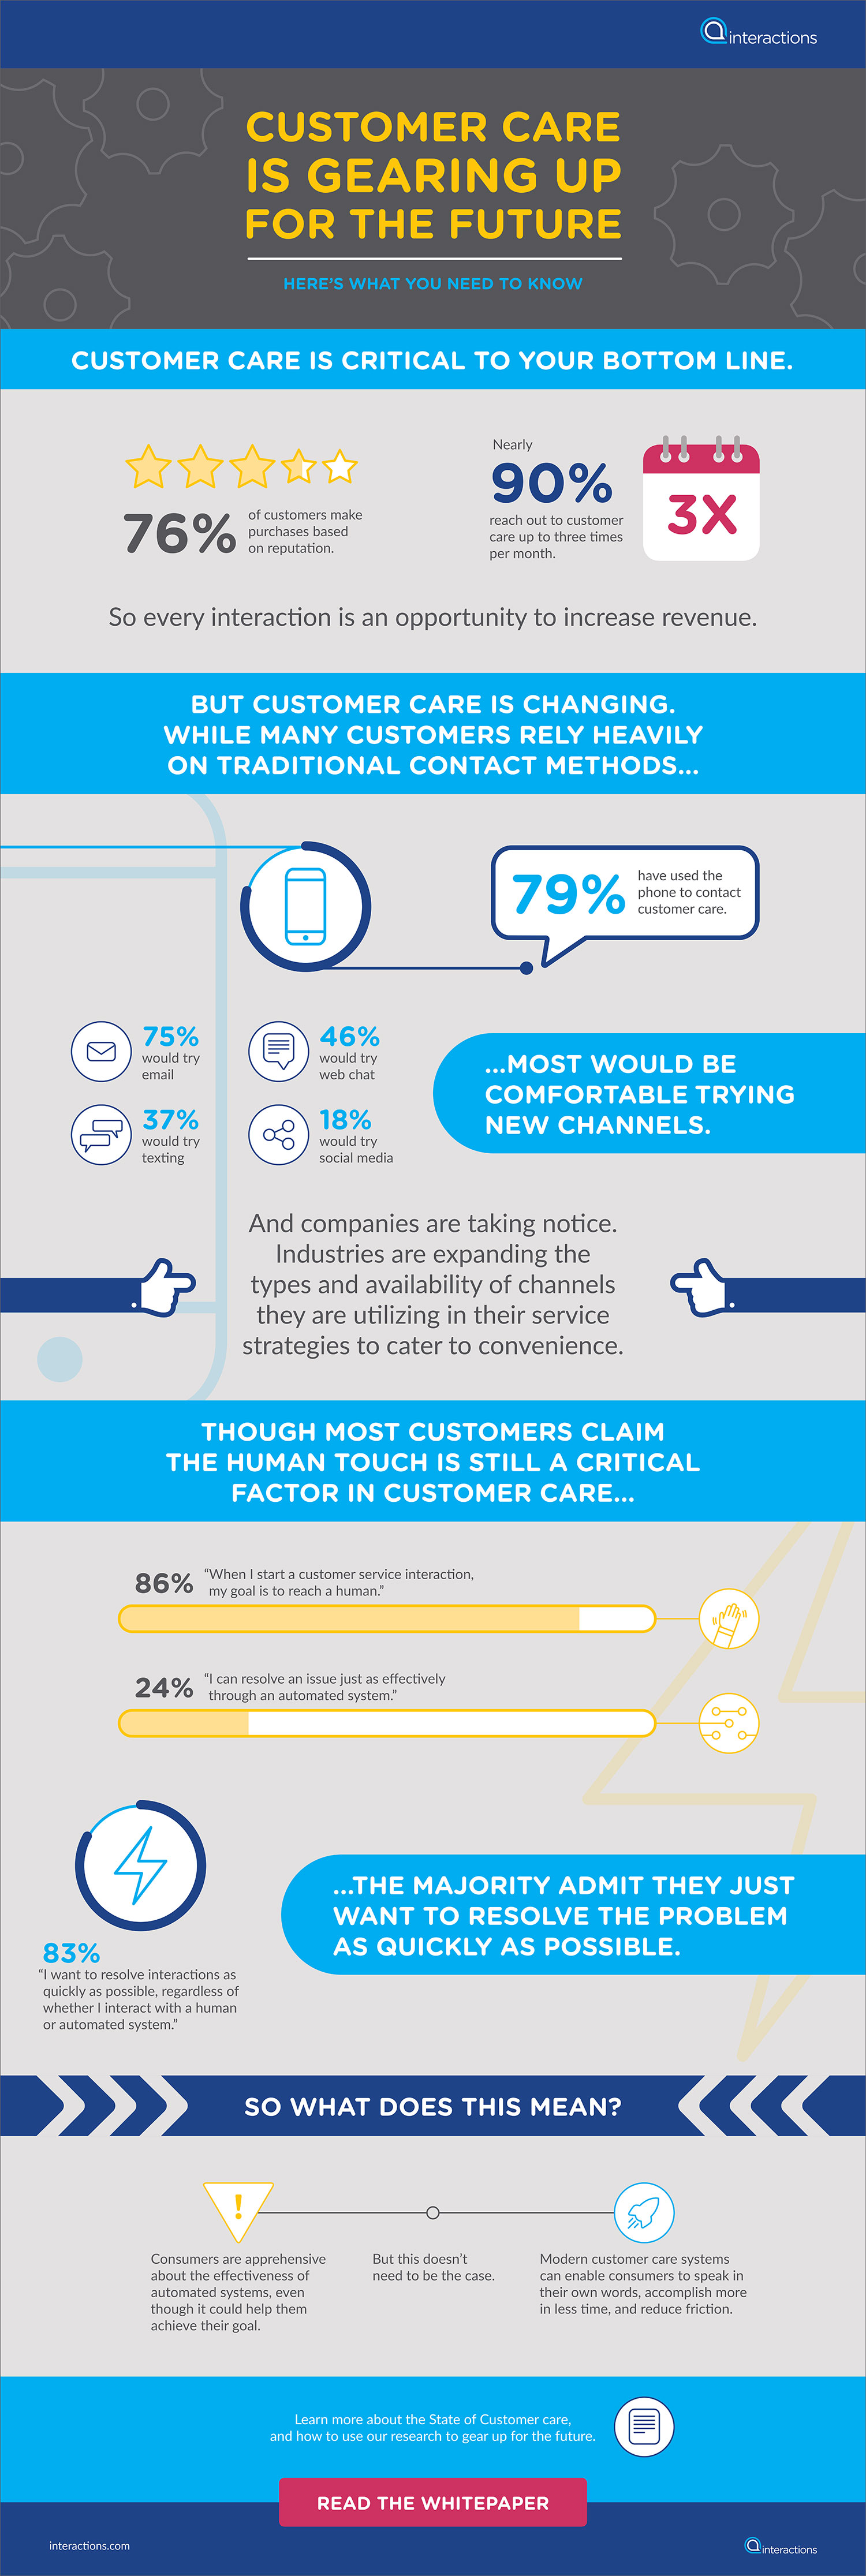 Customer Are Gearing Up for the Future Infographic